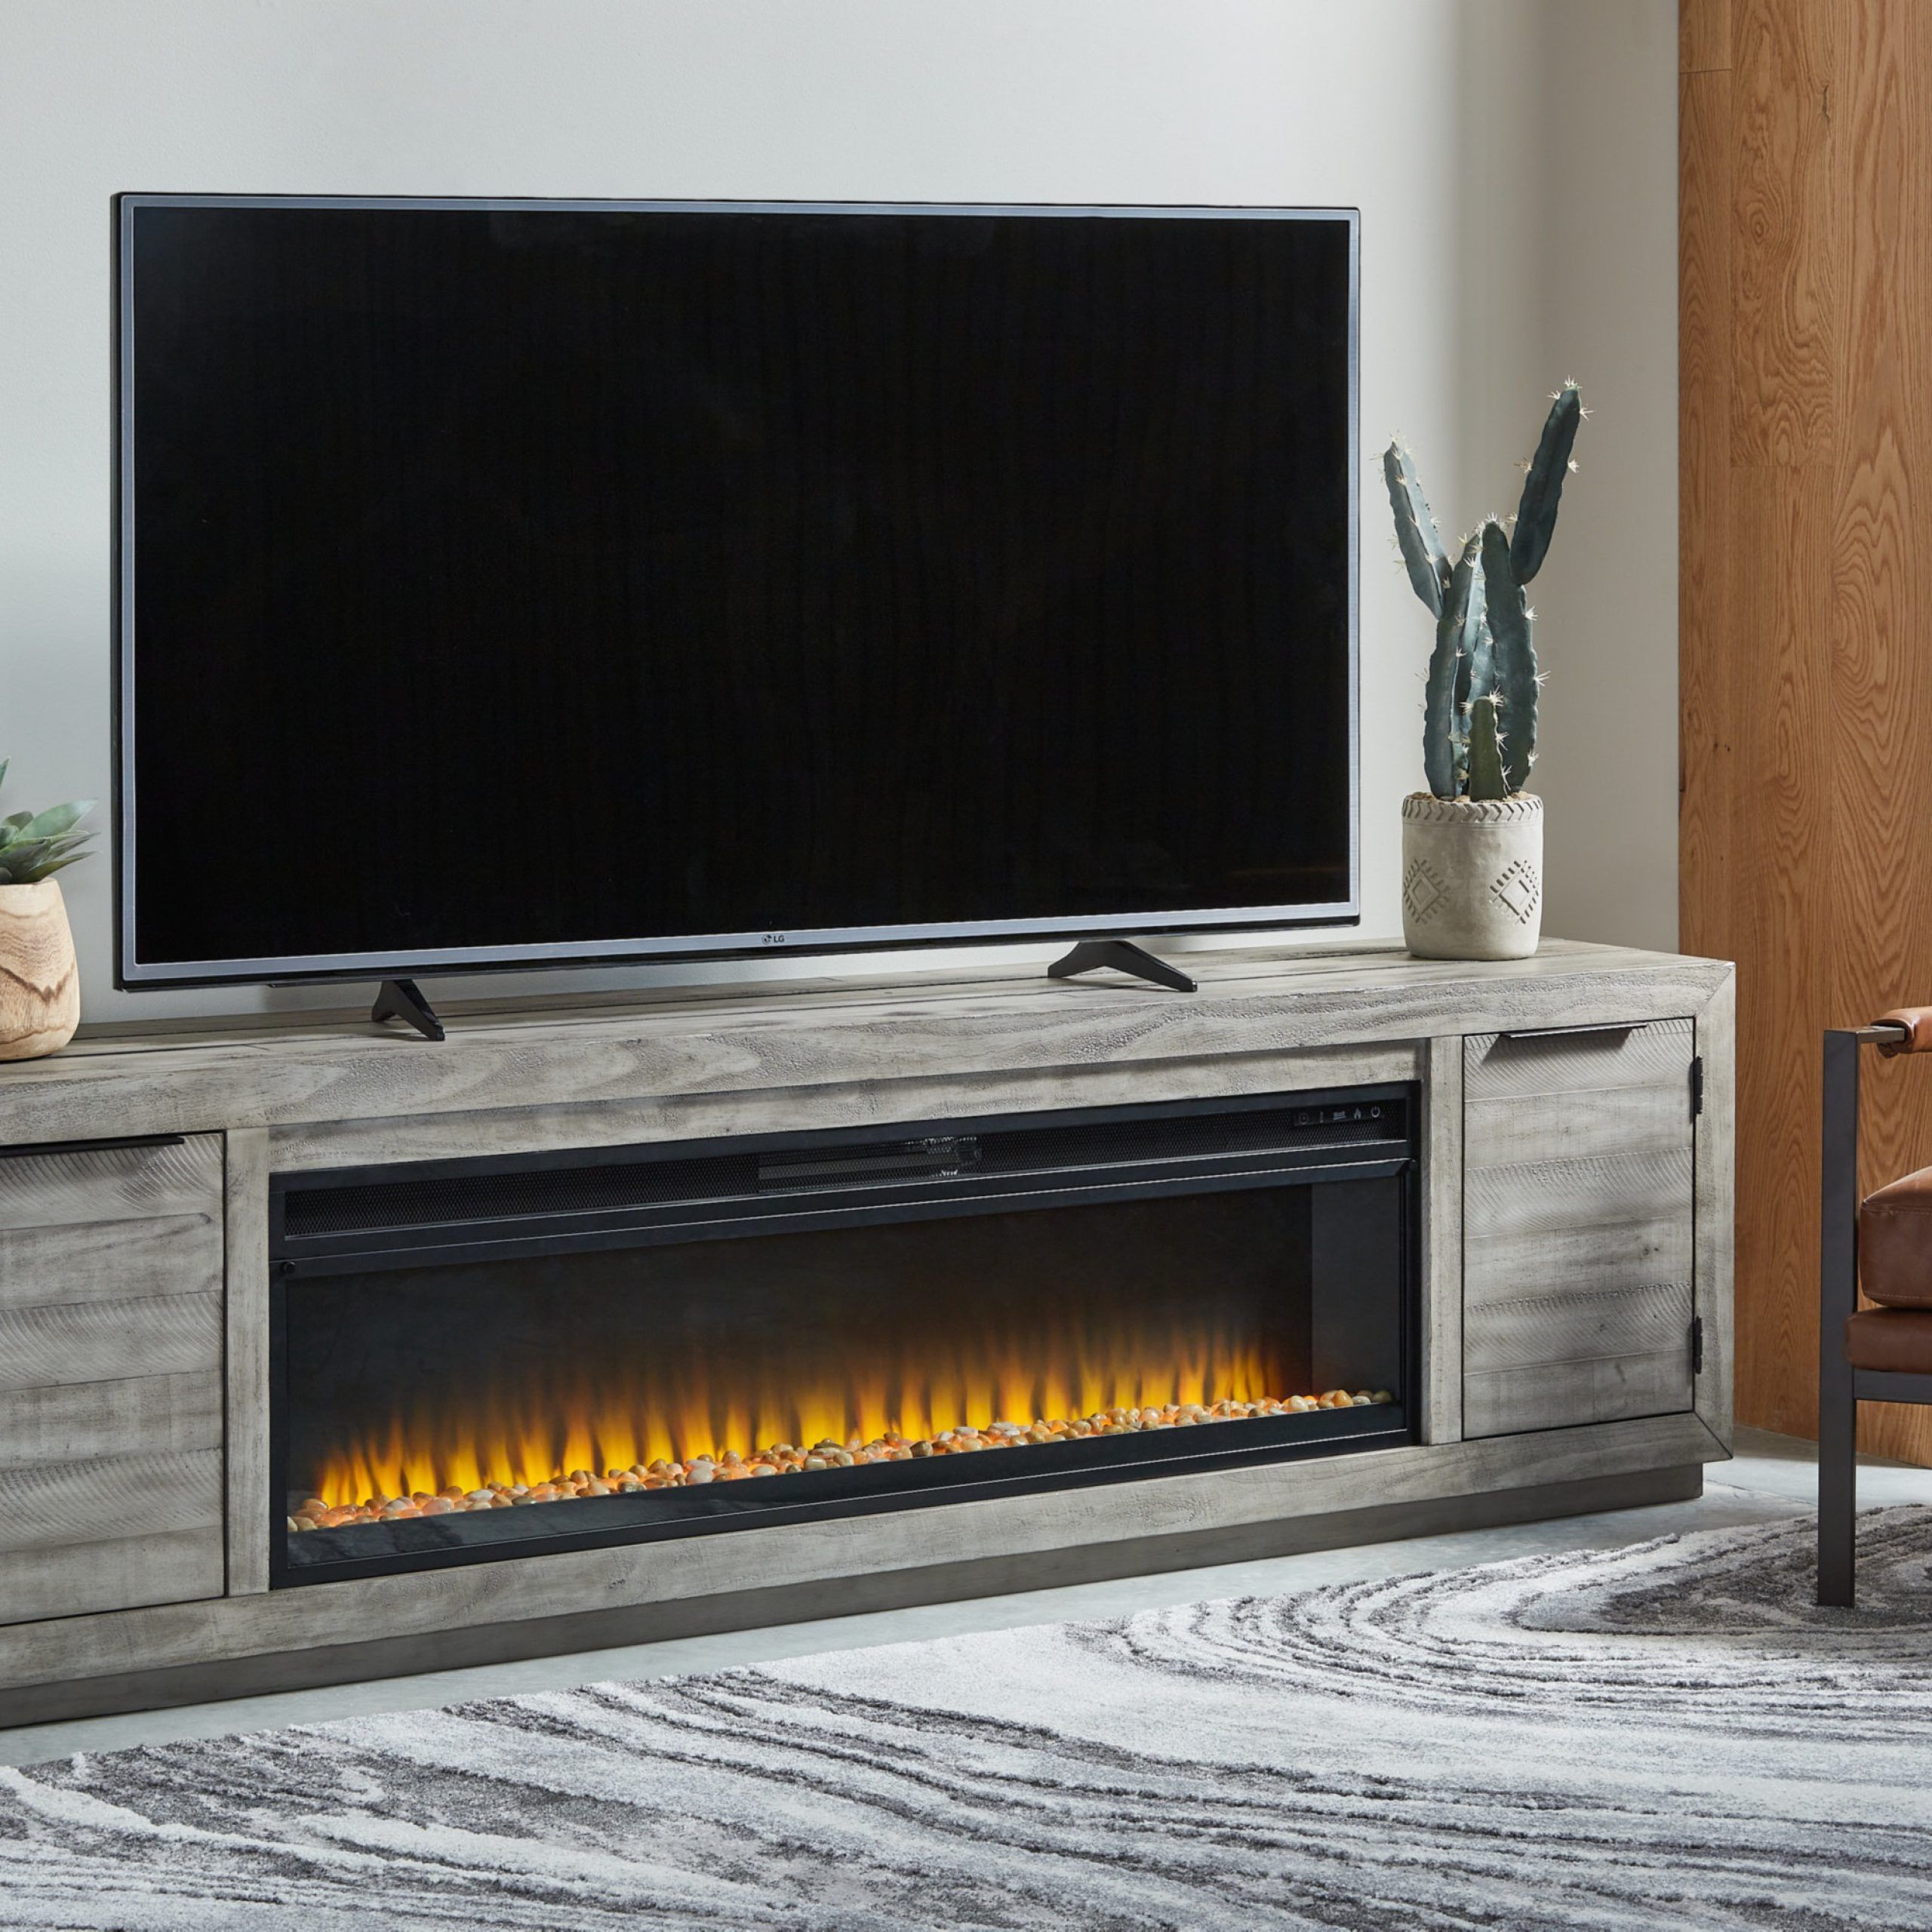 Signature Designashley Naydell Tv Stand For Tvs Up To 88" With Electric  Fireplace Included & Reviews | Wayfair Throughout Electric Fireplace Tv Stands (View 8 of 15)